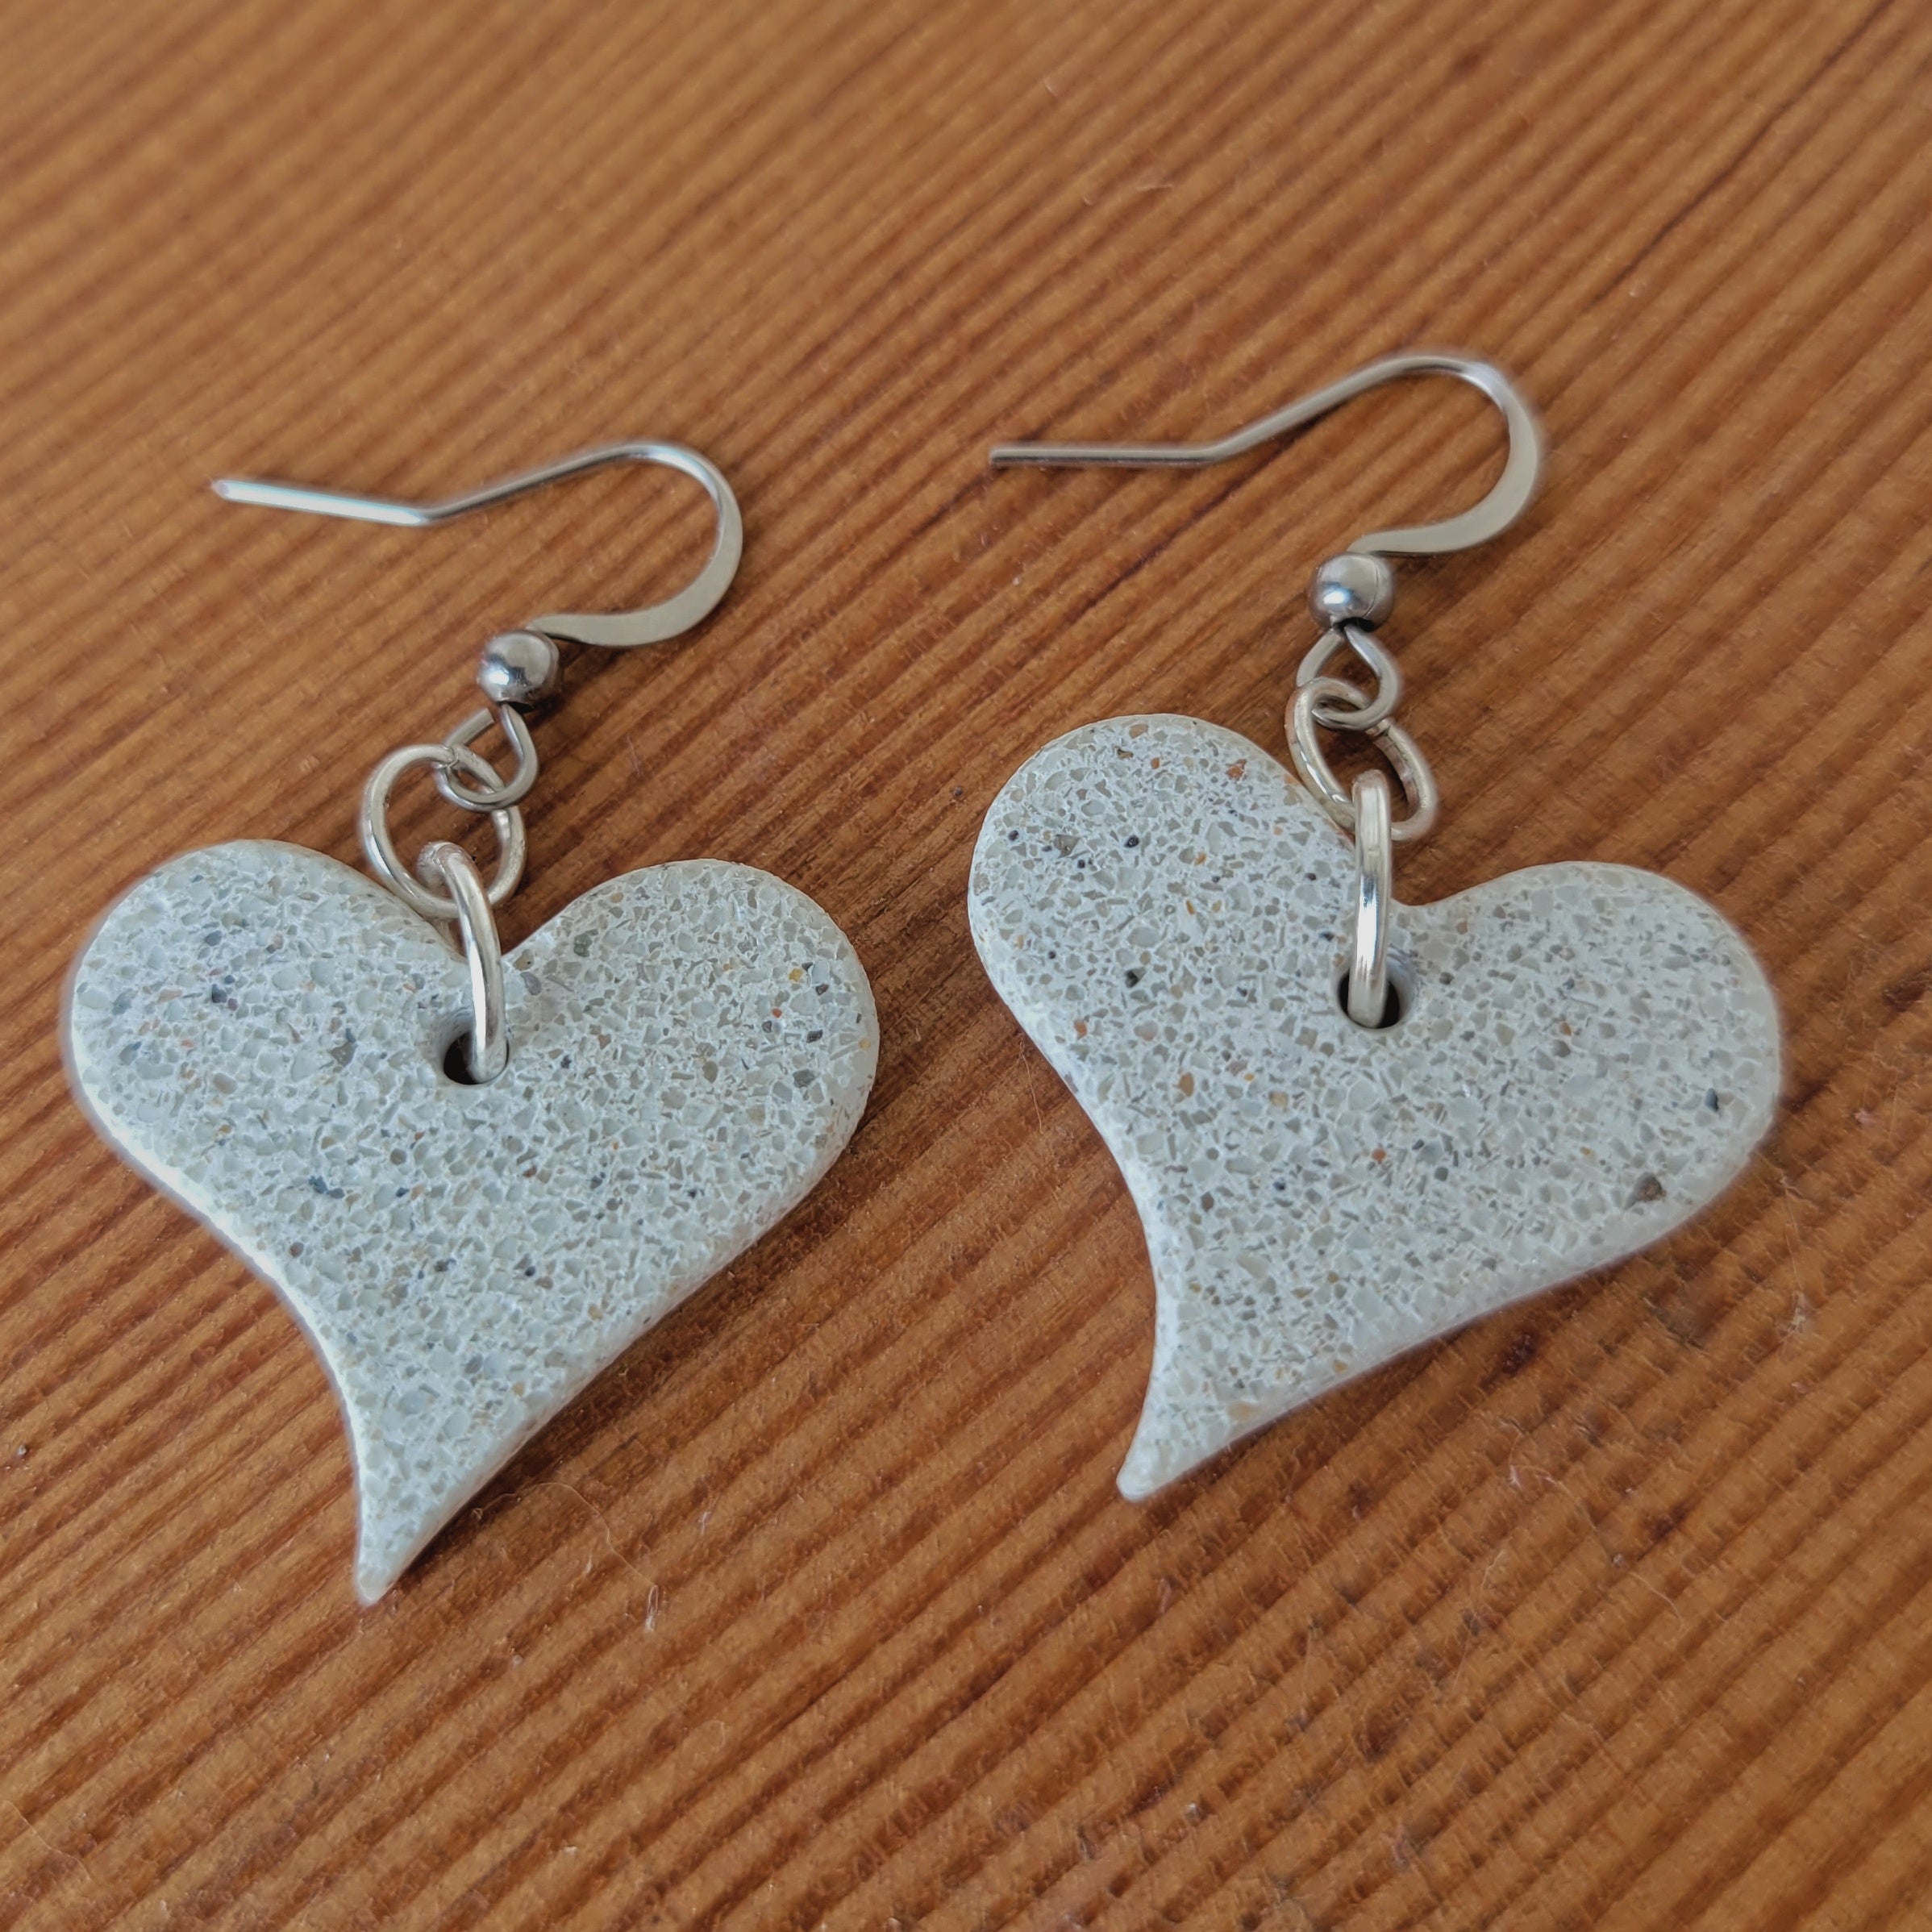 Sparkling White Sandstone Earrings with Pointed Tips, Silver Rings, and 316 Stainless Steel Hooks - Elegant Jewelry Pair side by side